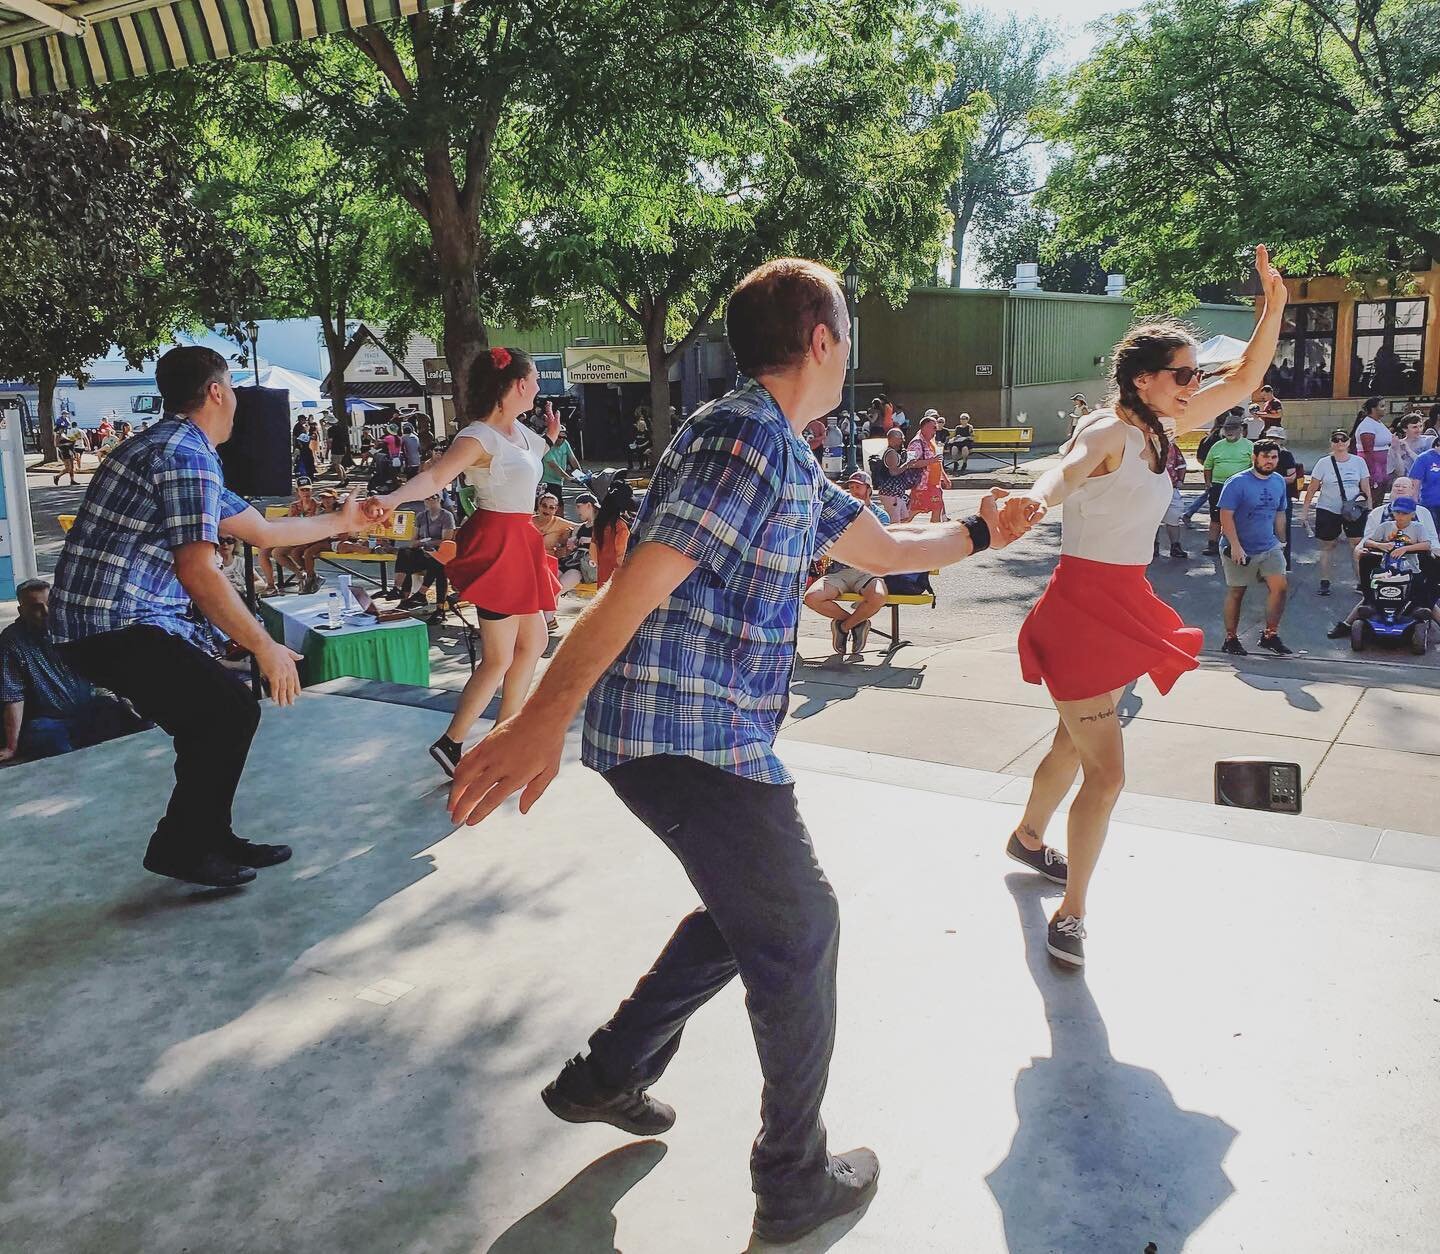 It's showtime! If you're at the Minnesota State Fair, stop by the Cosgrove Stage by the Education Building, we are performing today at 1:00 pm &amp; 2:30 pm.